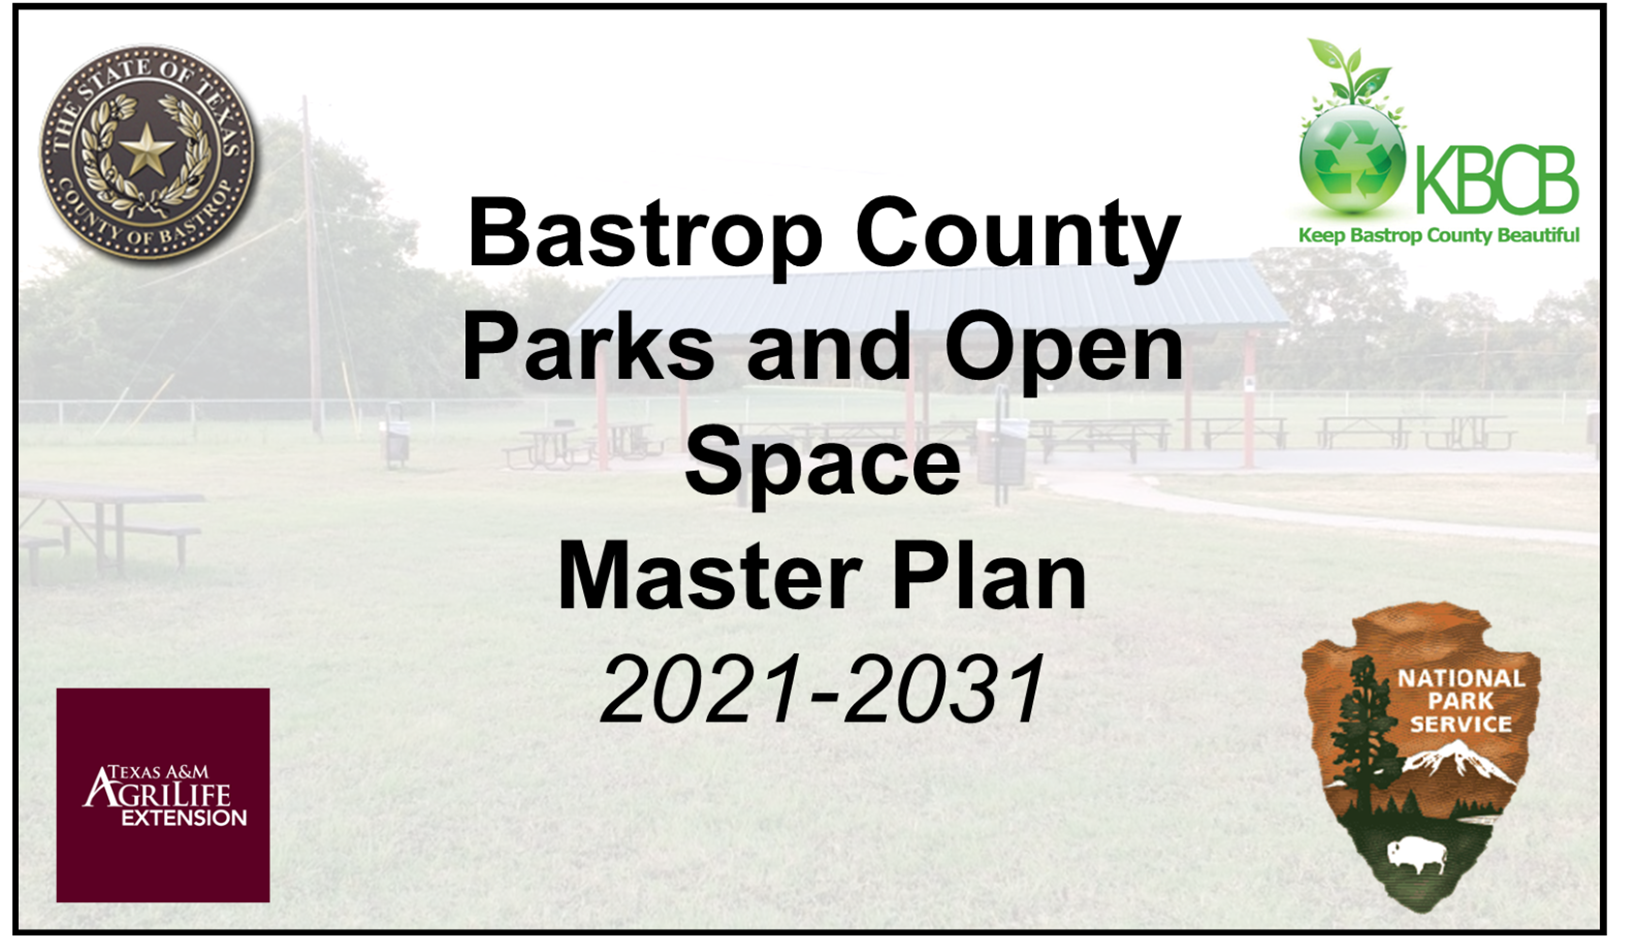 Bastrop County Parks and Open Space Master Plan